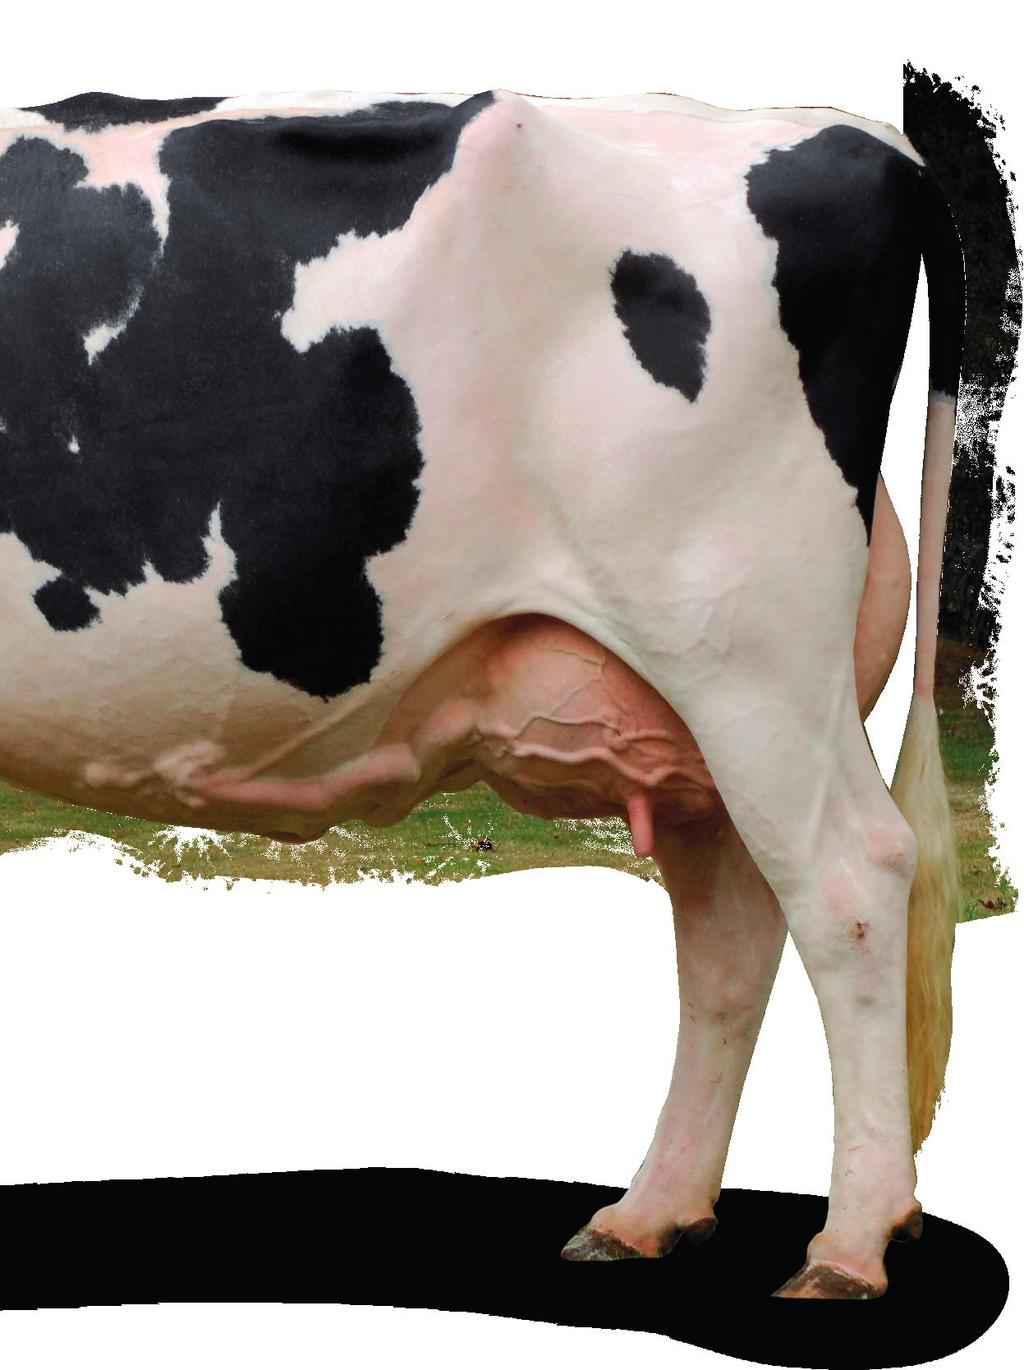 SECURING MILK QUALITY BY PROTECTING THE UDDER Selenium helps fight bacteria.